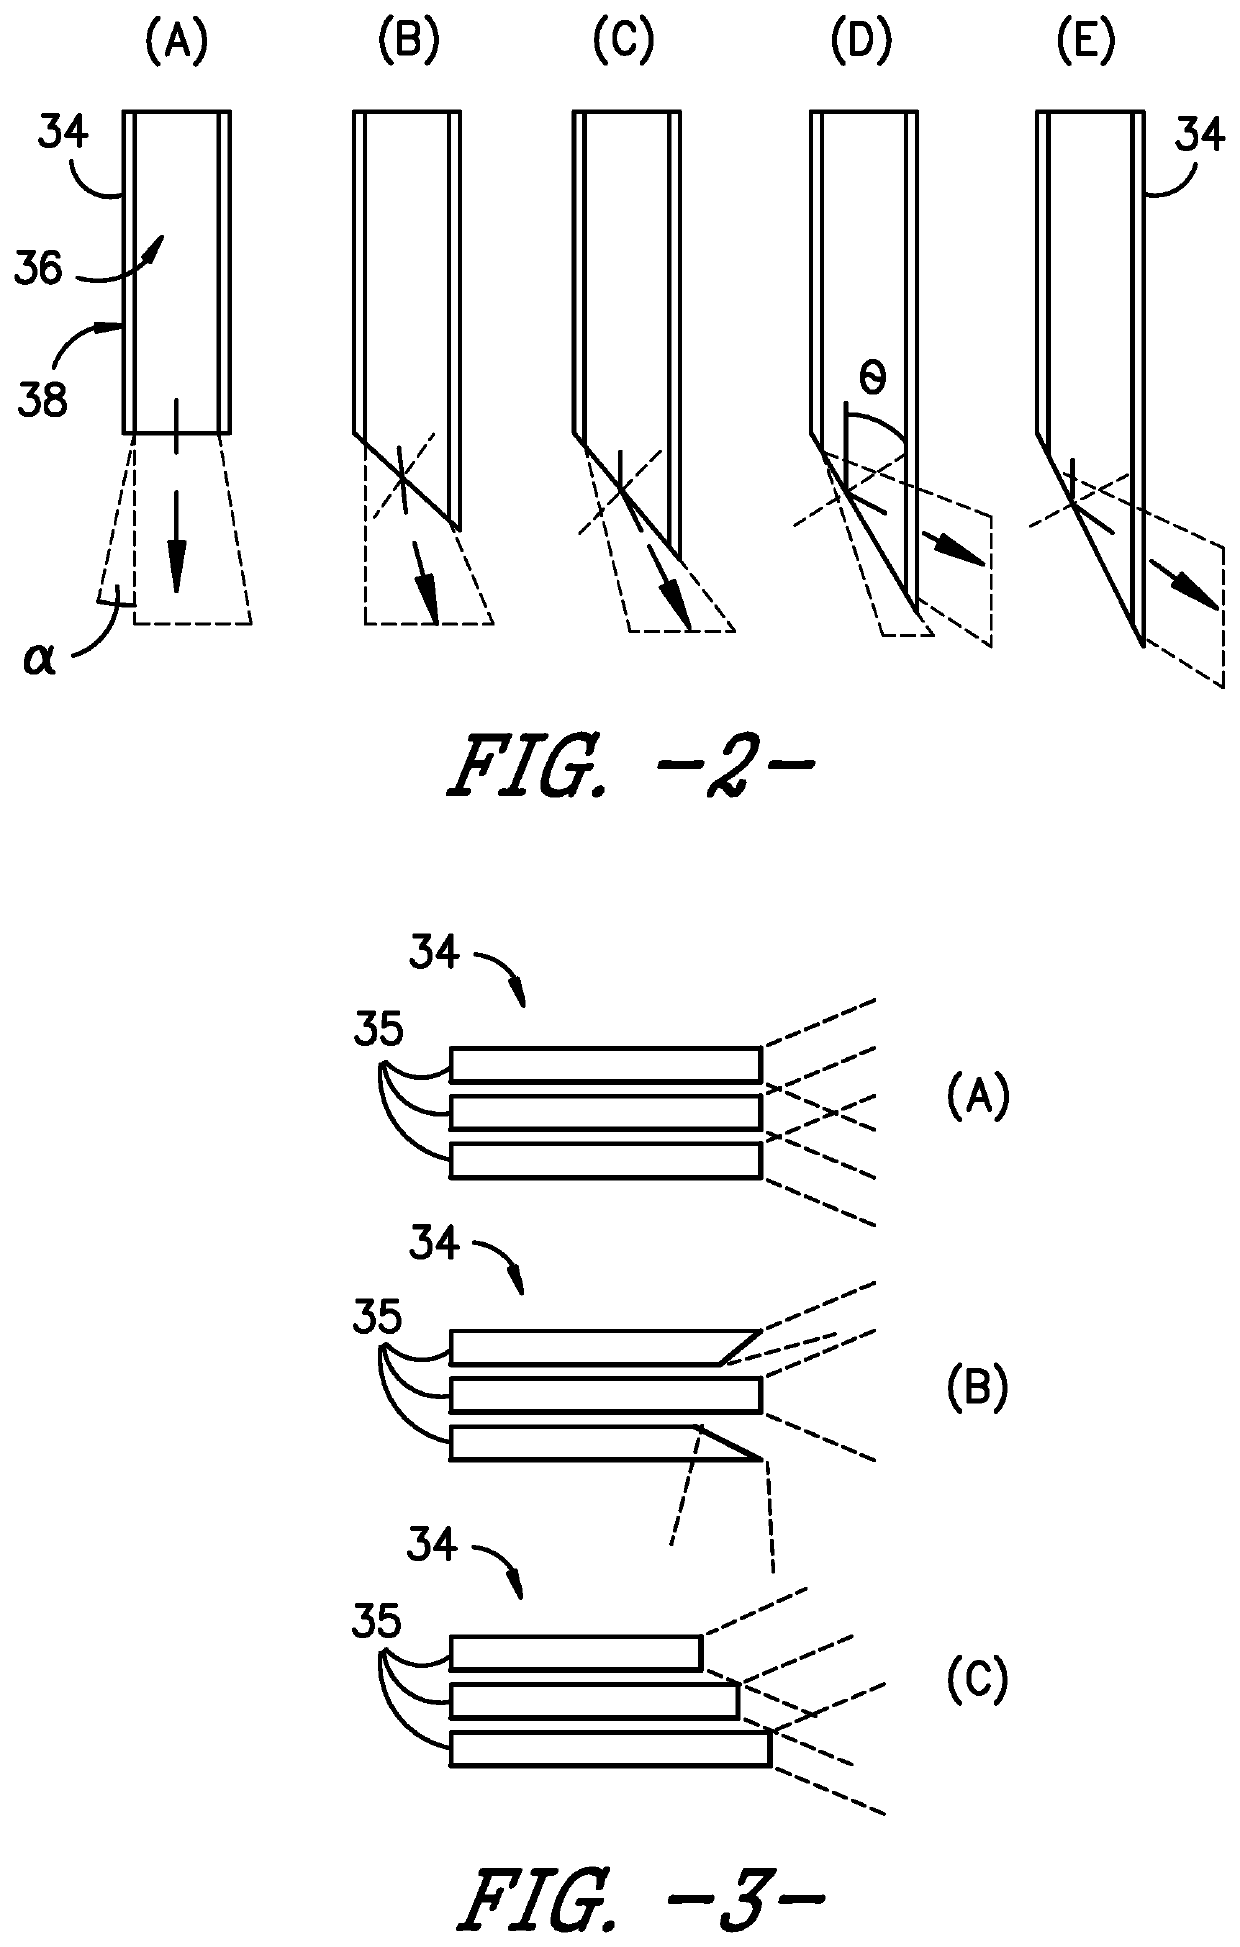 System and Method for In Situ Visualization of Nerves Using Targeted Flourescent Molecules